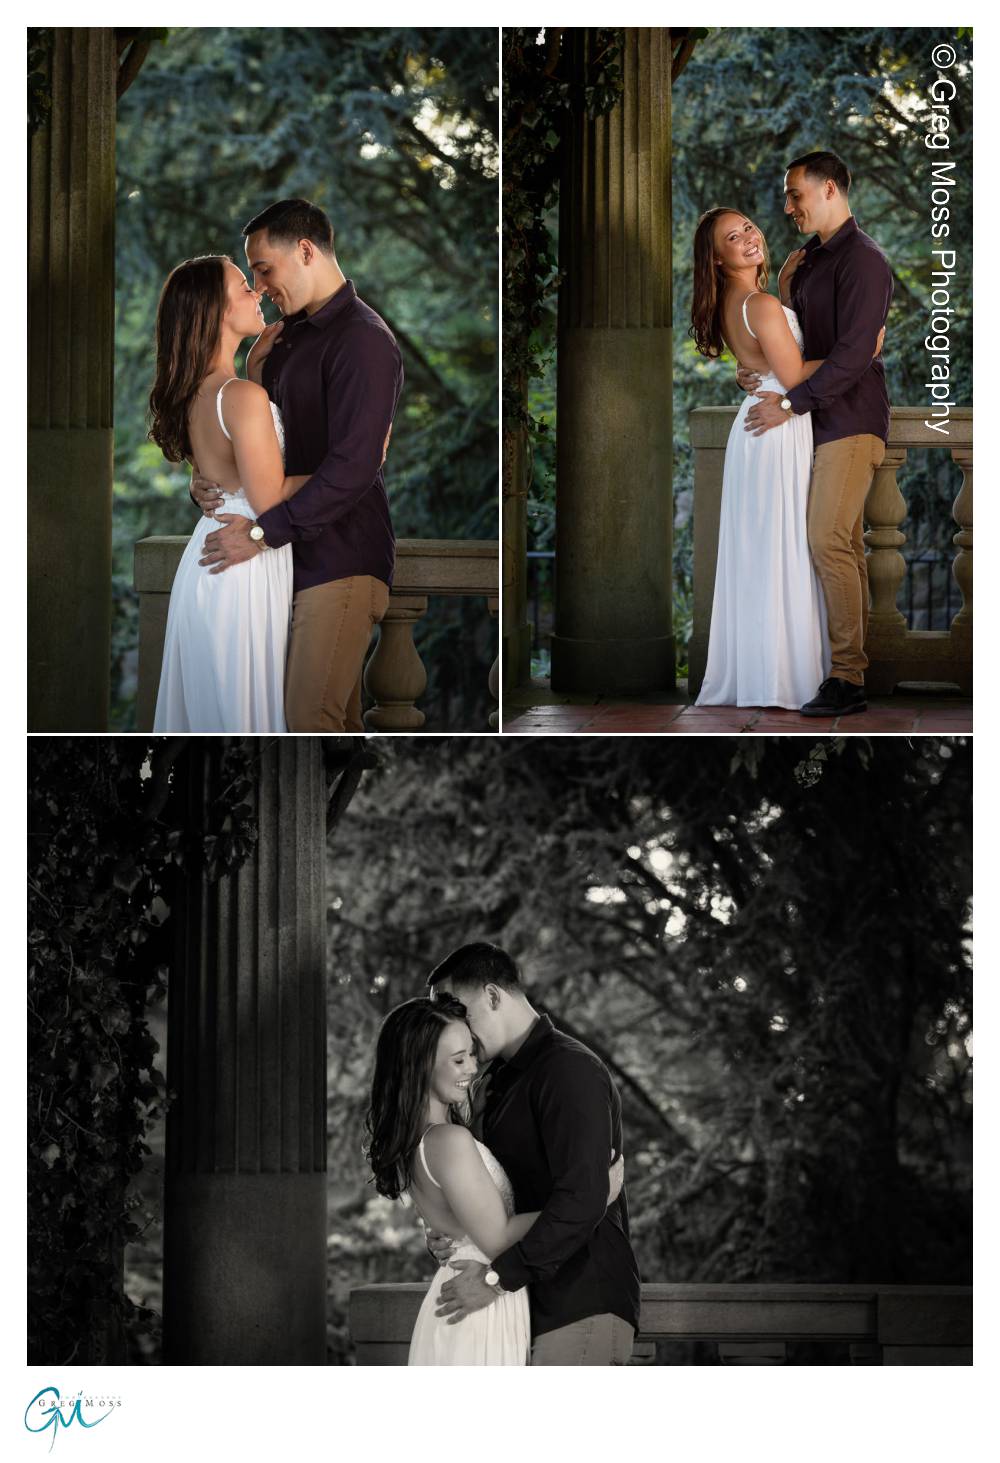 Engaged couple kissing among the columns and ivy